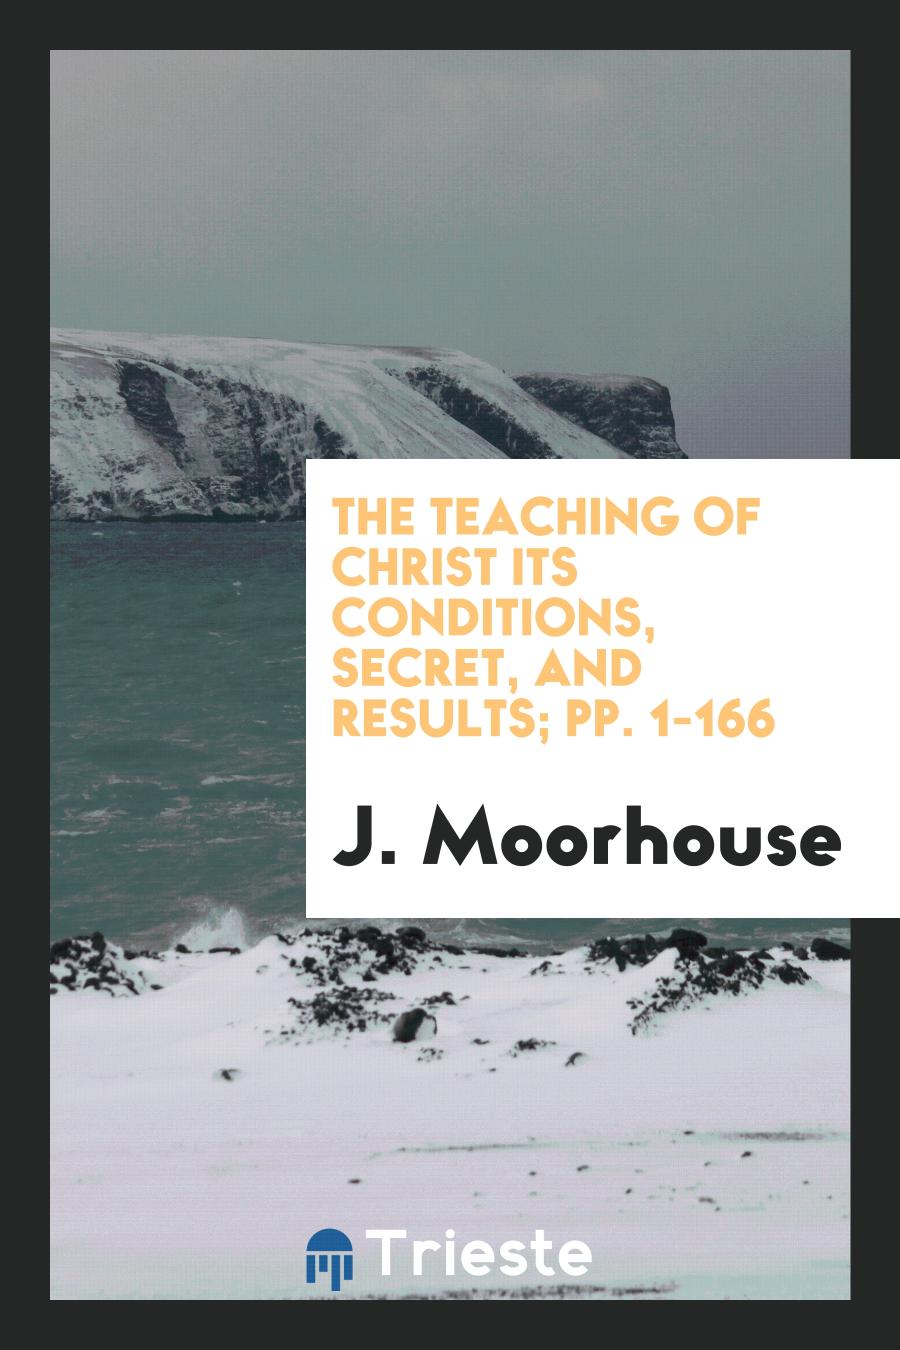 The Teaching of Christ Its Conditions, Secret, and Results; pp. 1-166